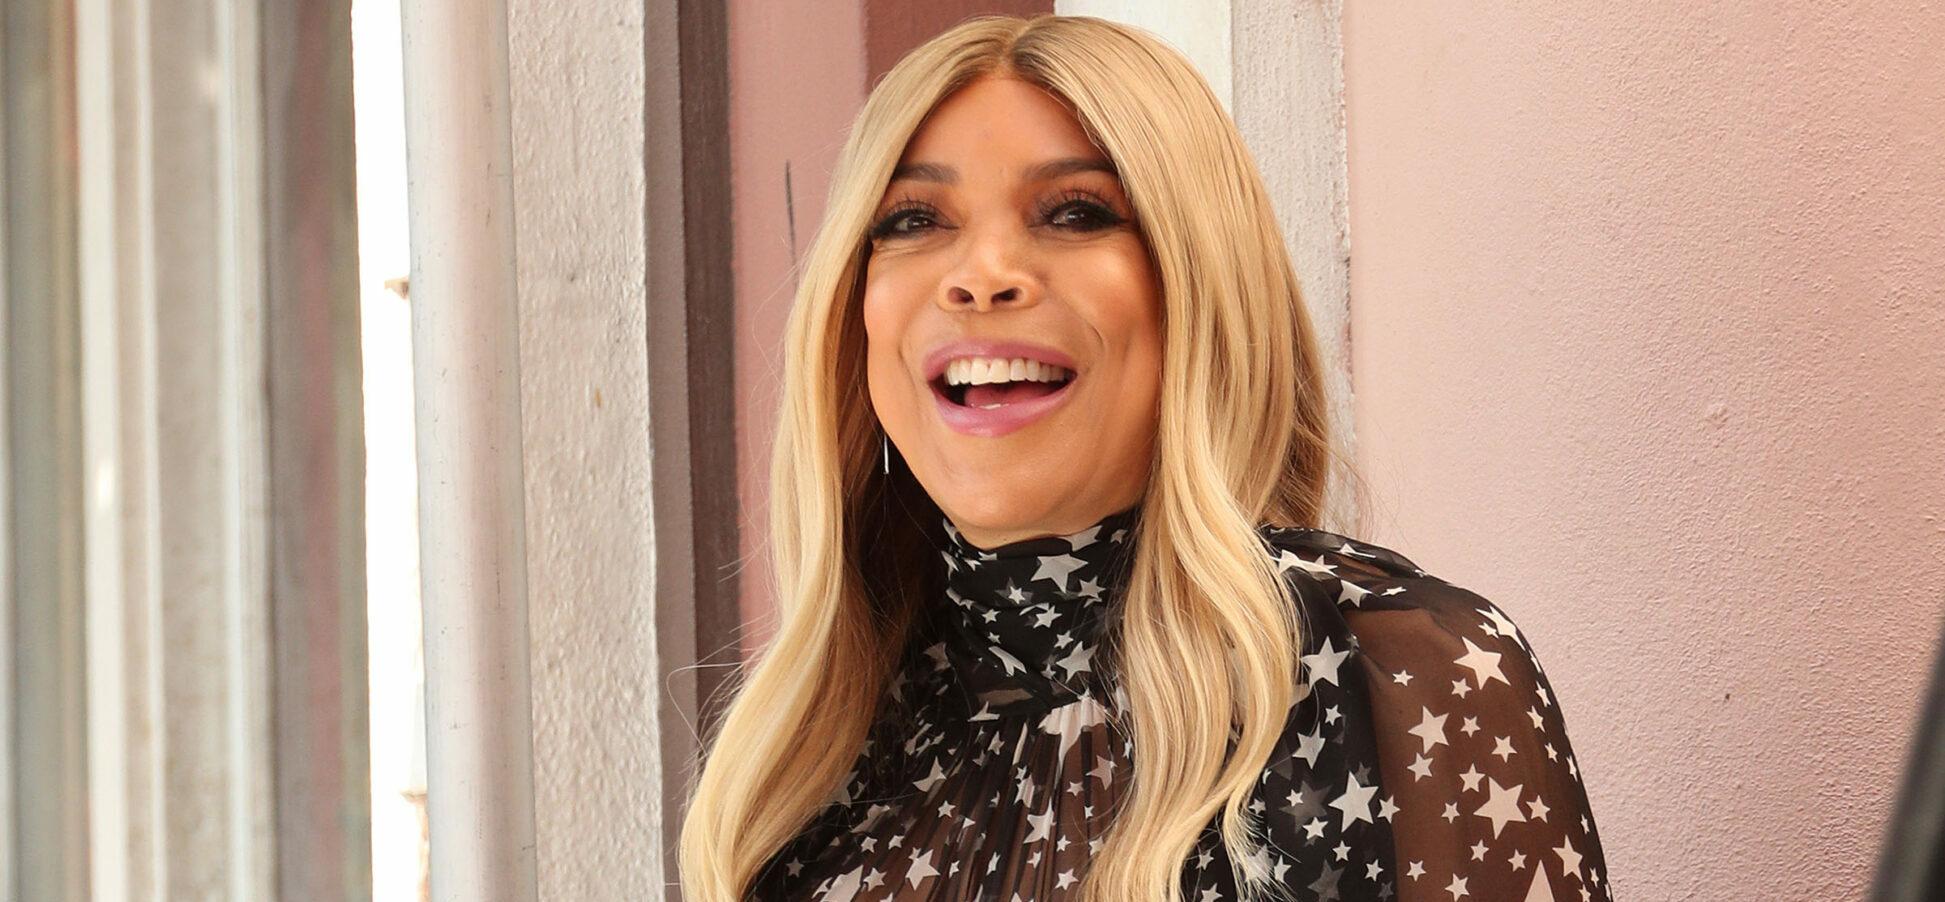 Wendy Williams’ Best Friend Claims The Former TV Host Was Left Without Food By Her Legal Guardian